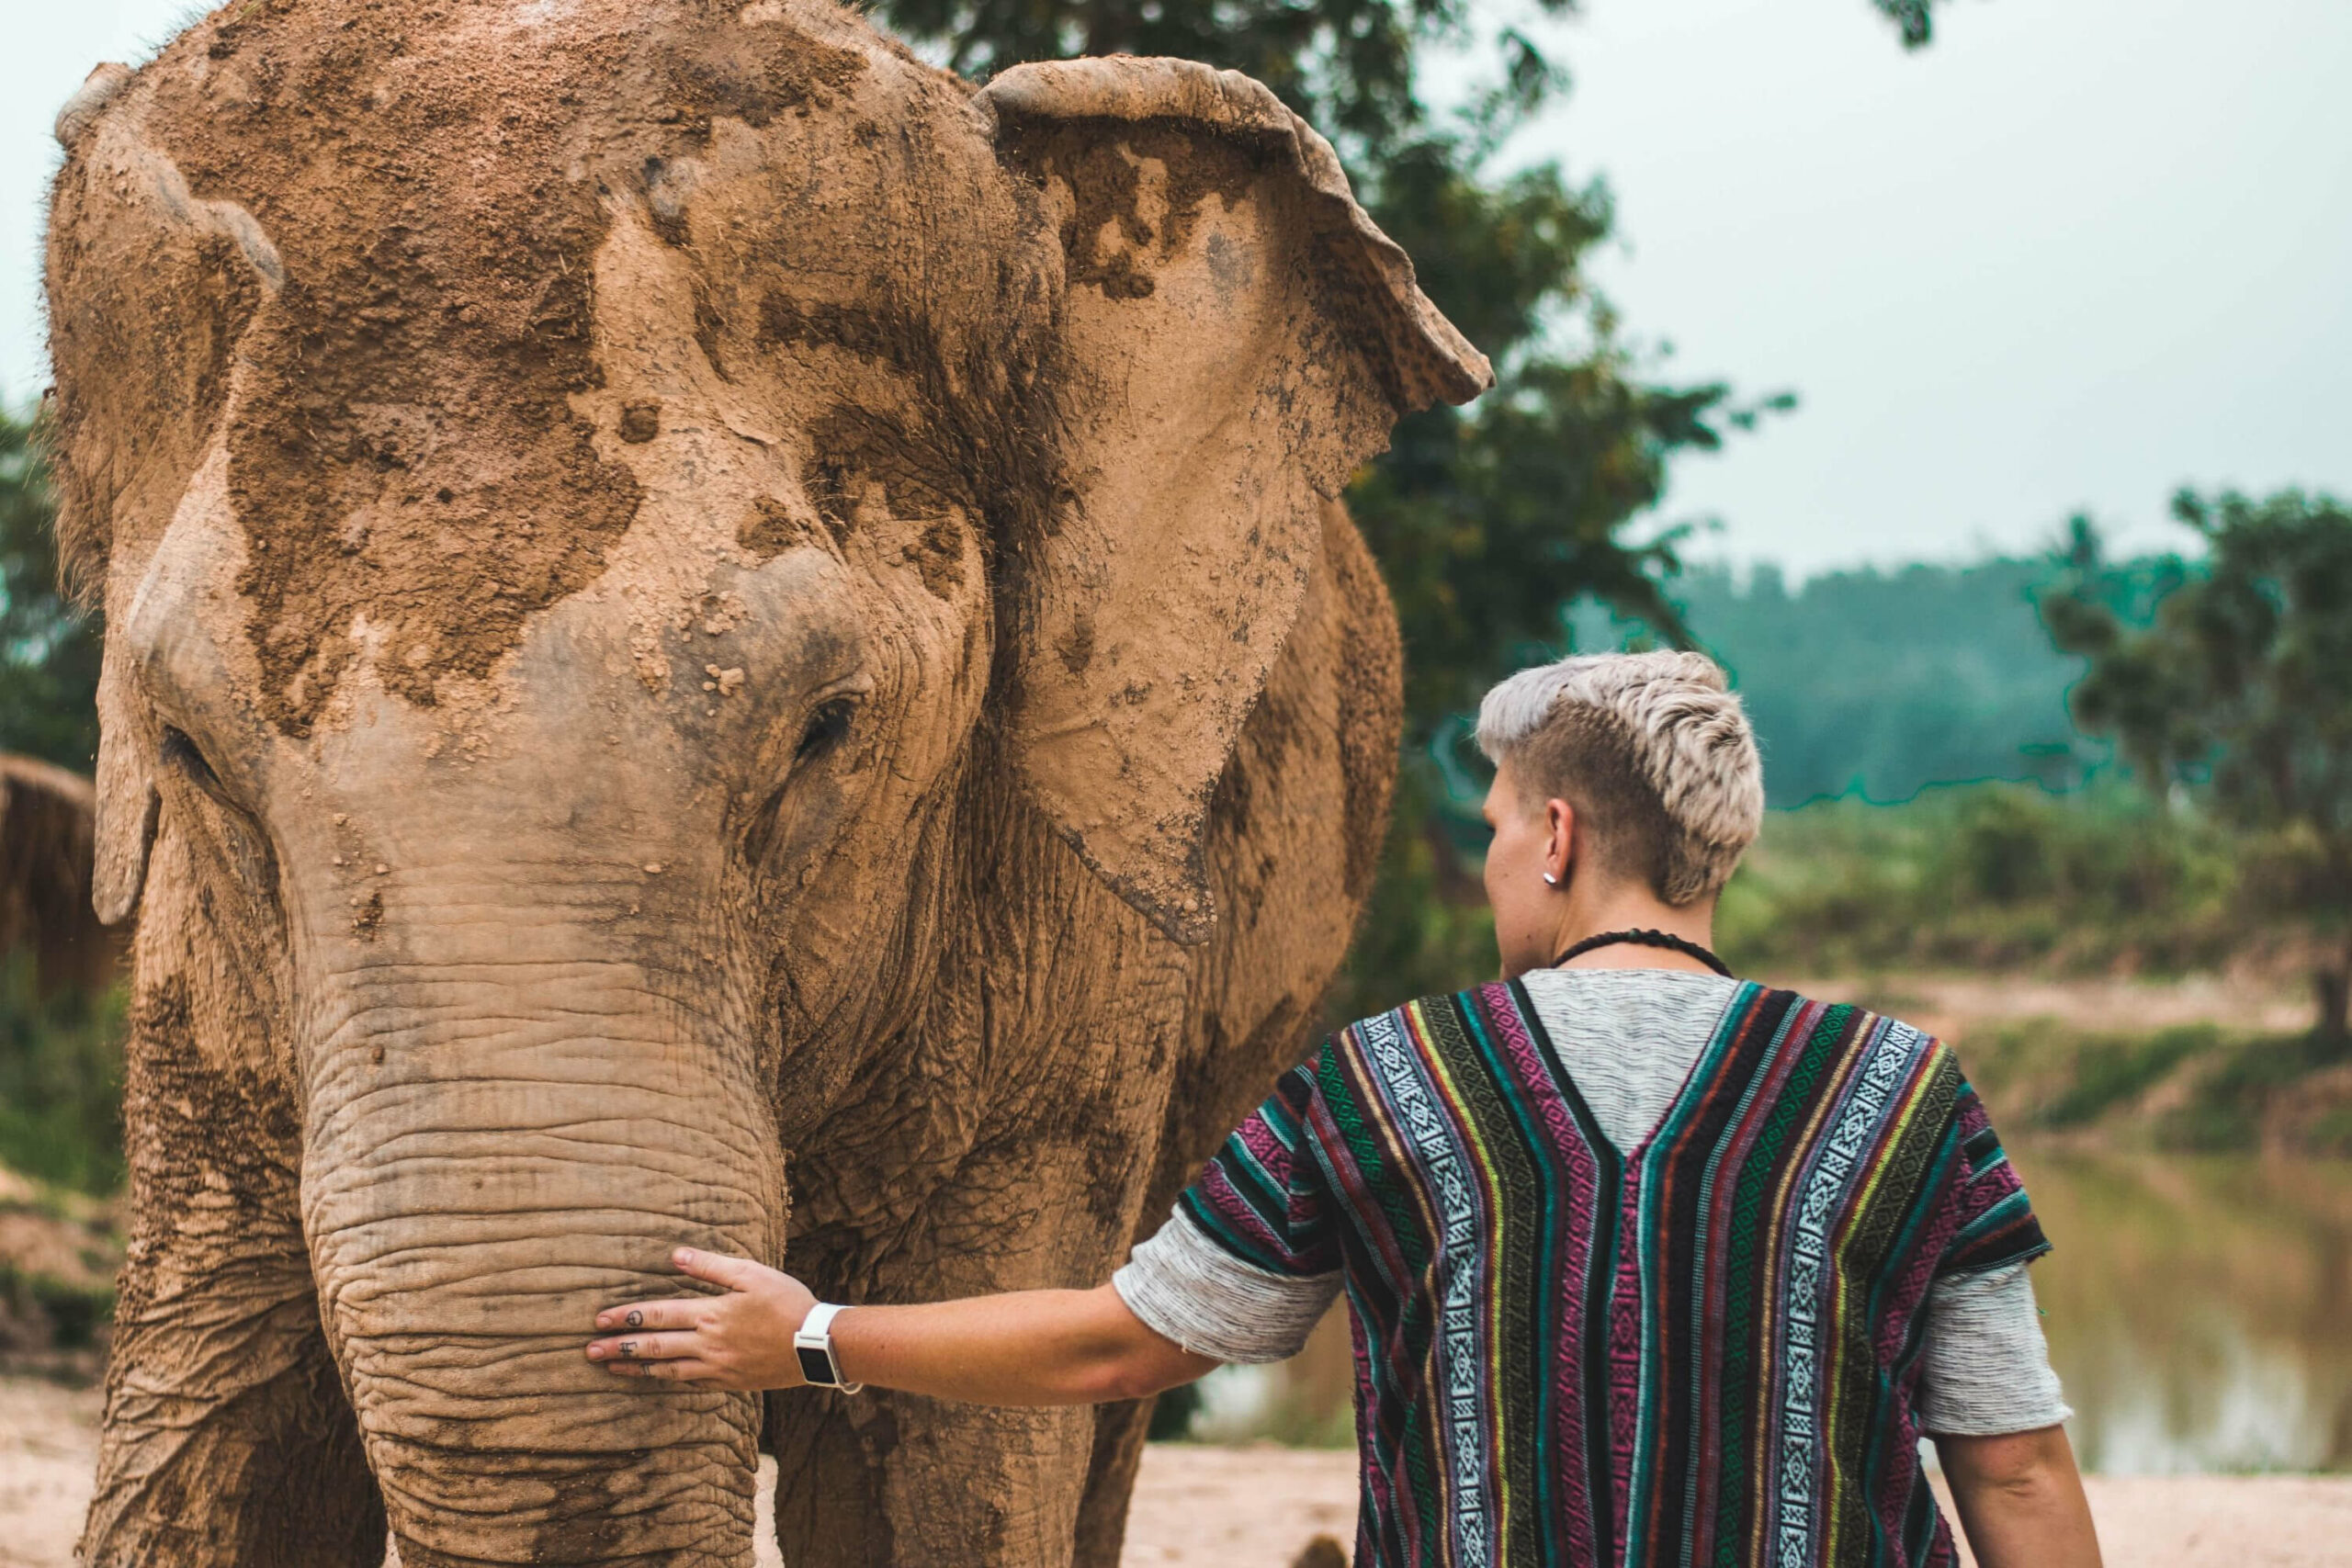 A man is peacefully petting an elephant during his holiday at the Phuket Elephant Sanctuary.